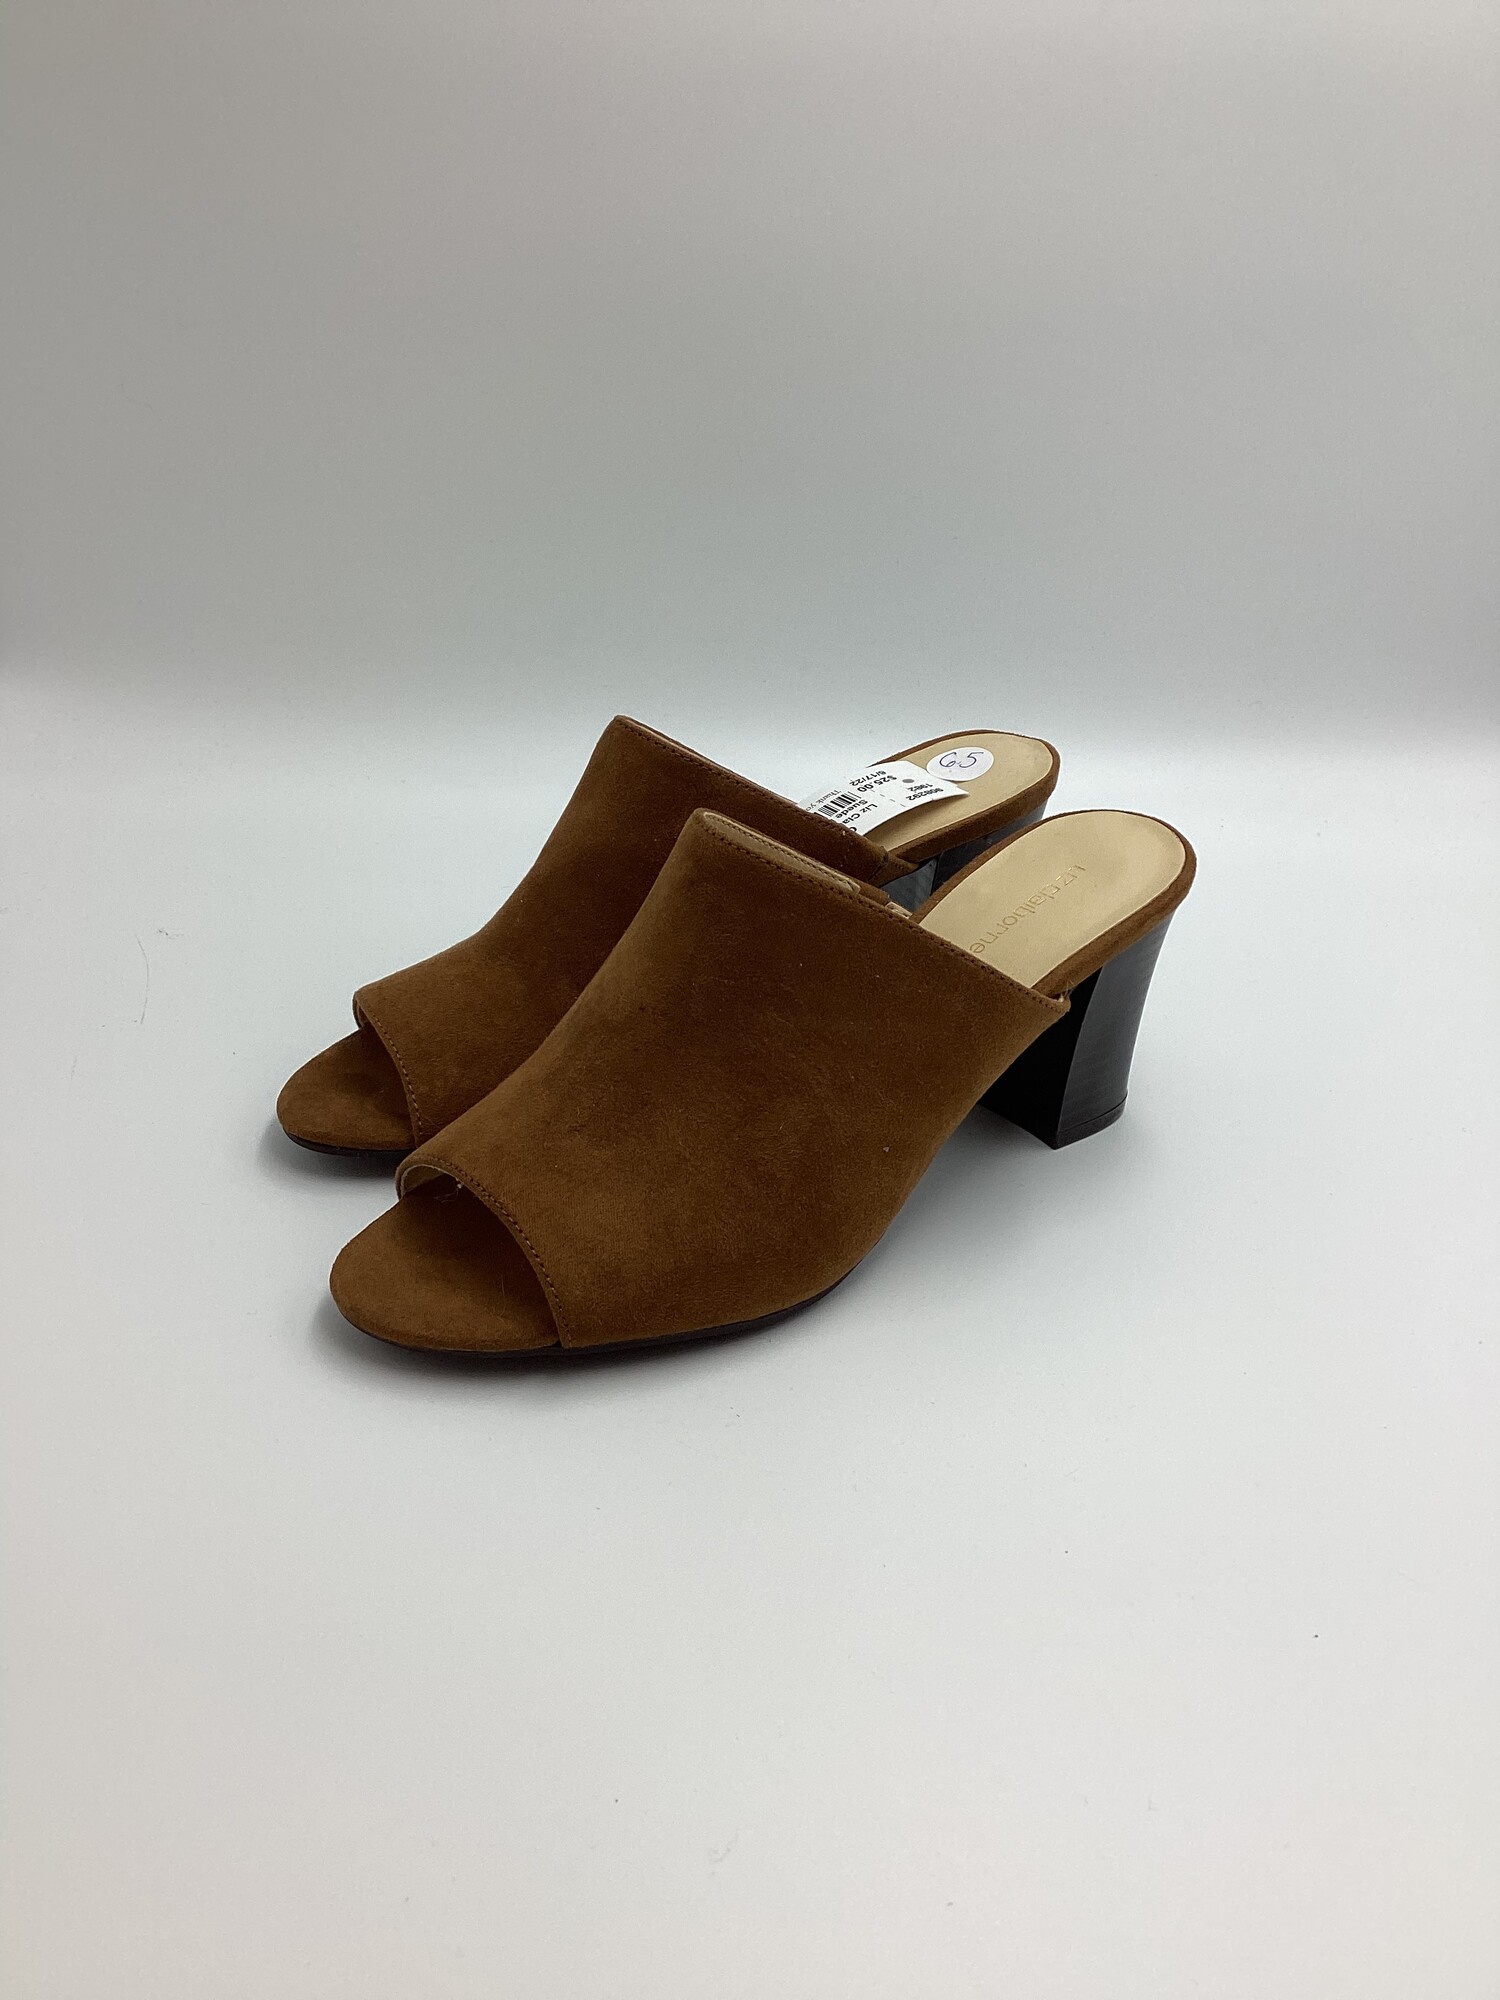 Suede Peep Toe Sandals, Brown, Size: 6.5